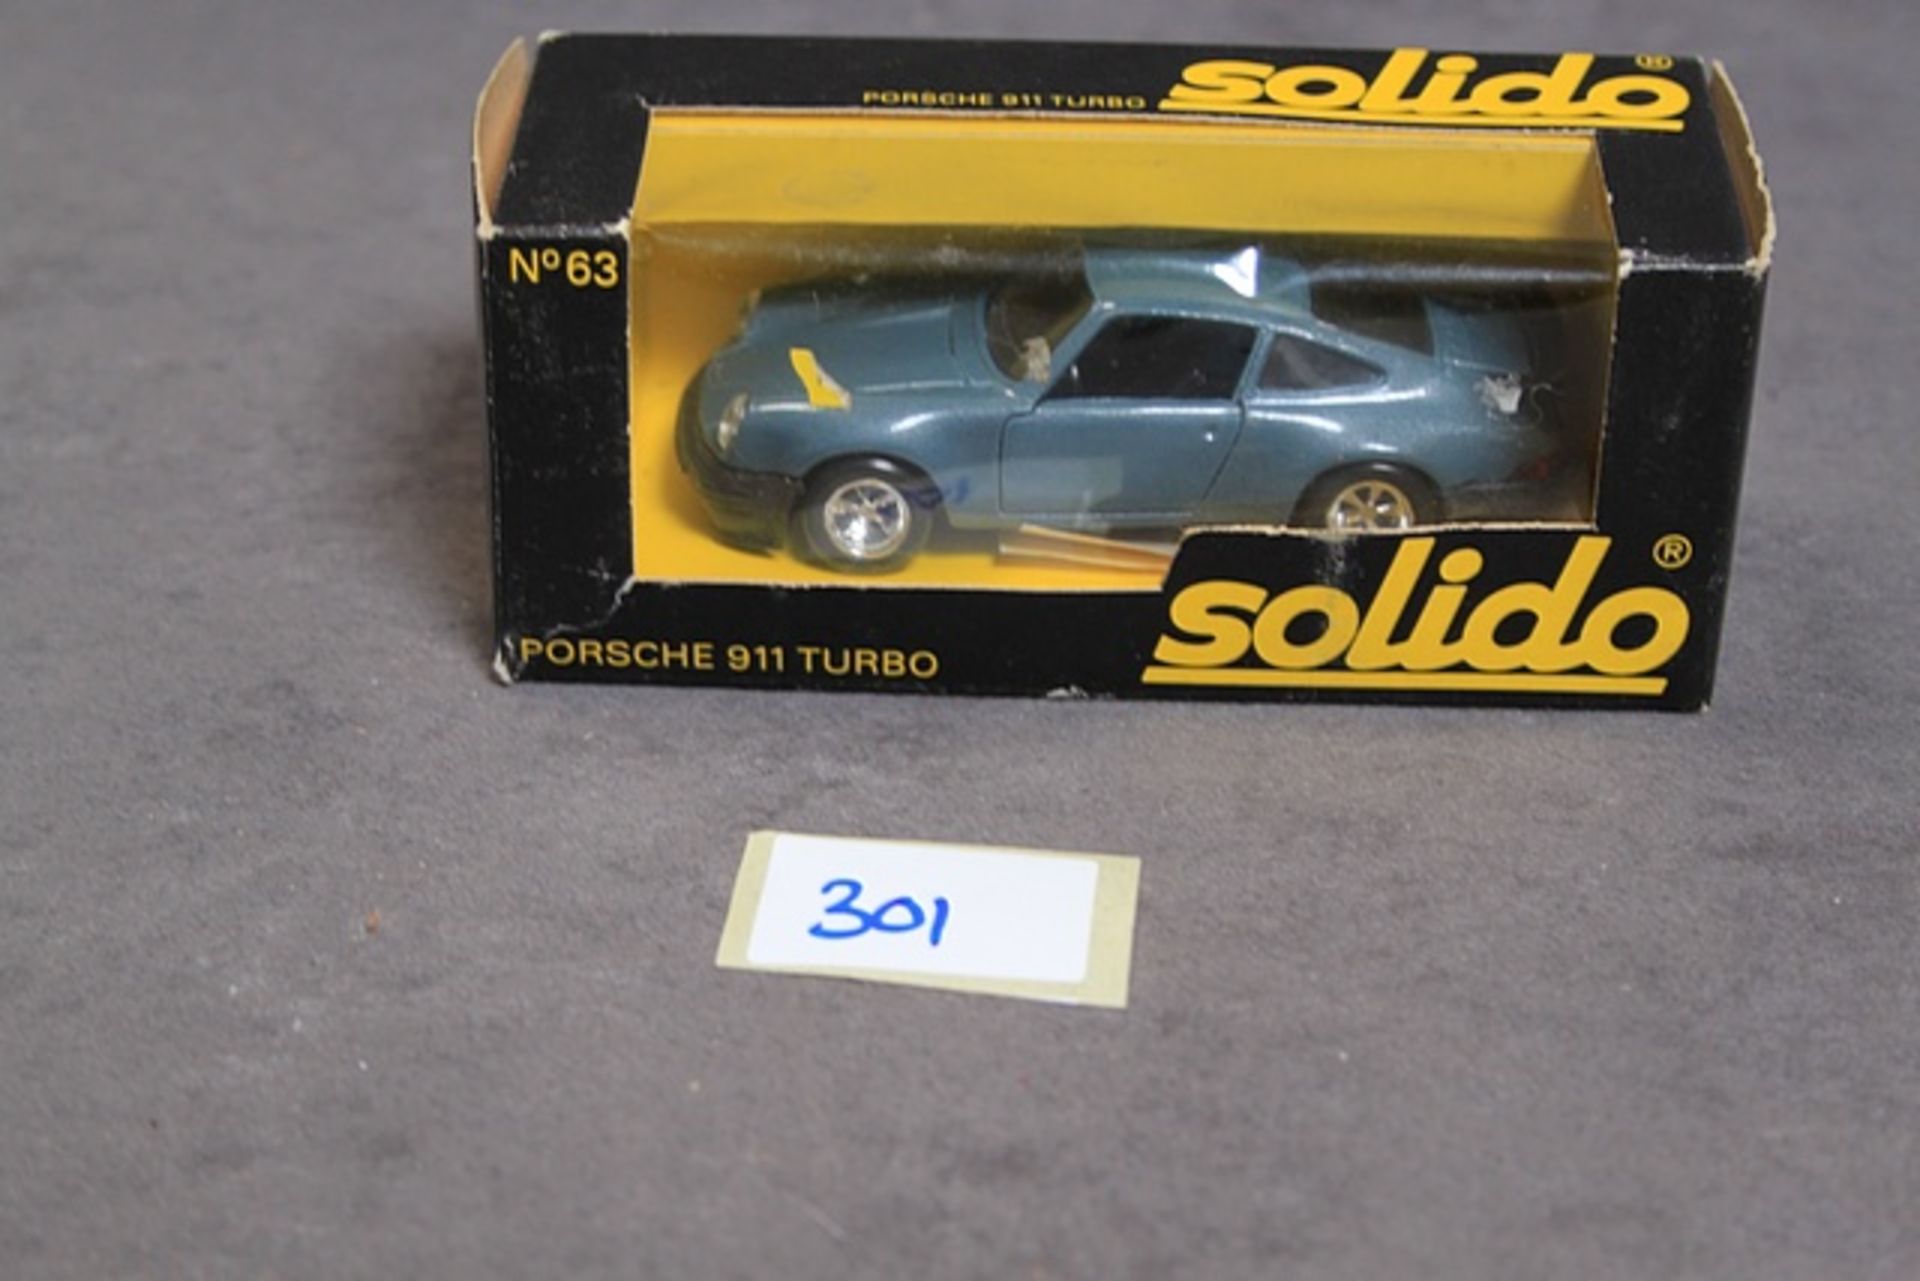 Solido Diecast Model #63 Porsche 911 In Blue Complete With Box - Image 2 of 2